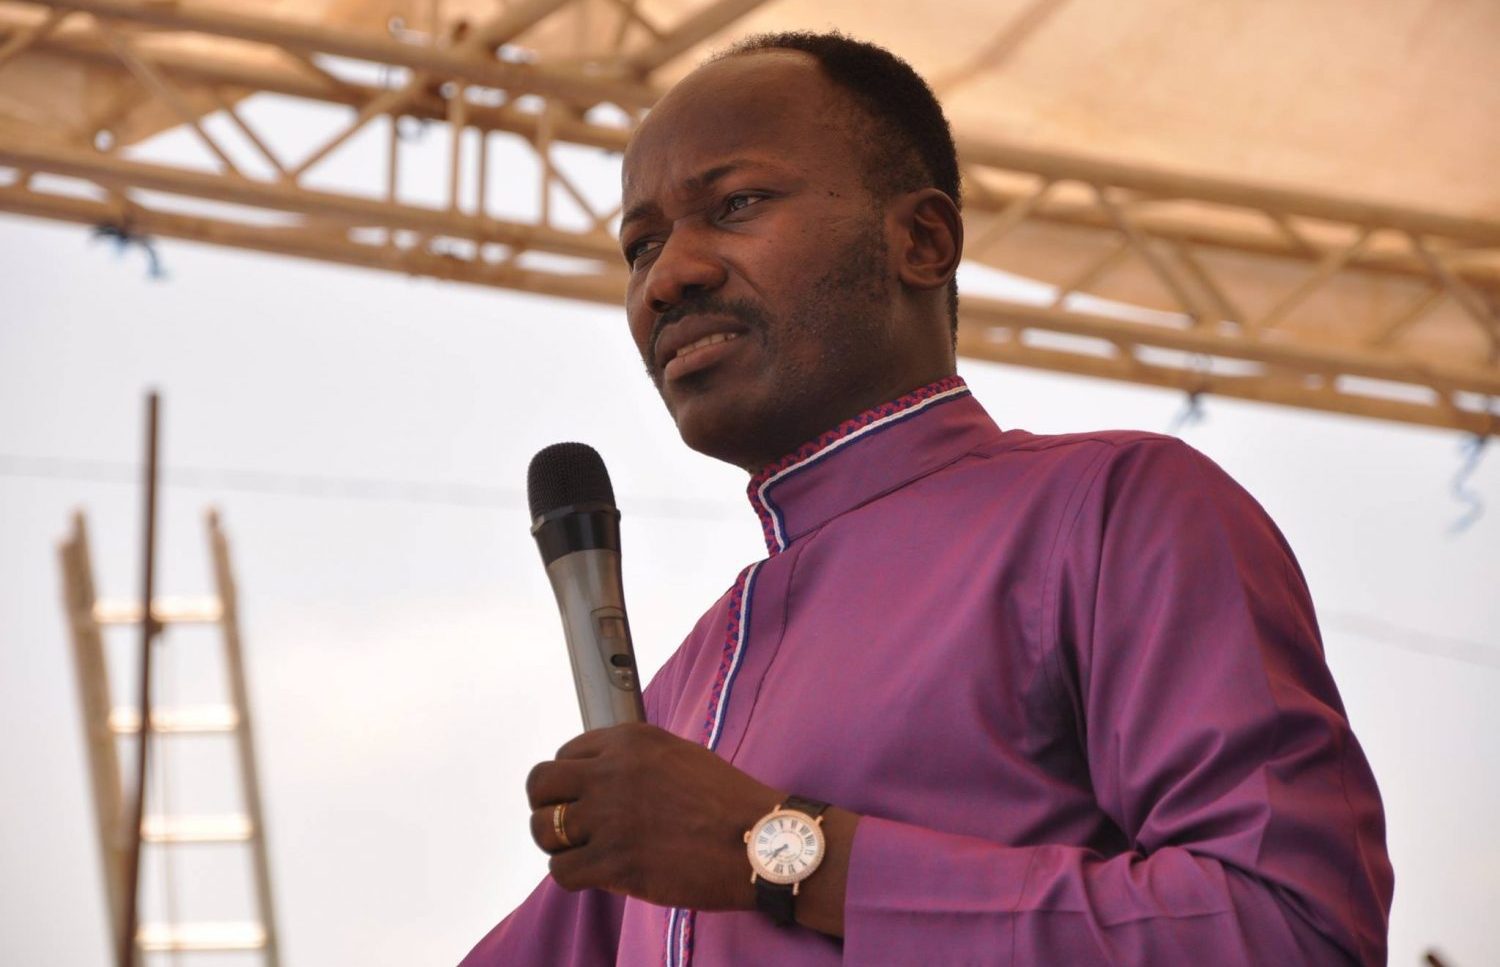 Apostle Johnson Suleman of Omega Fire Ministeries